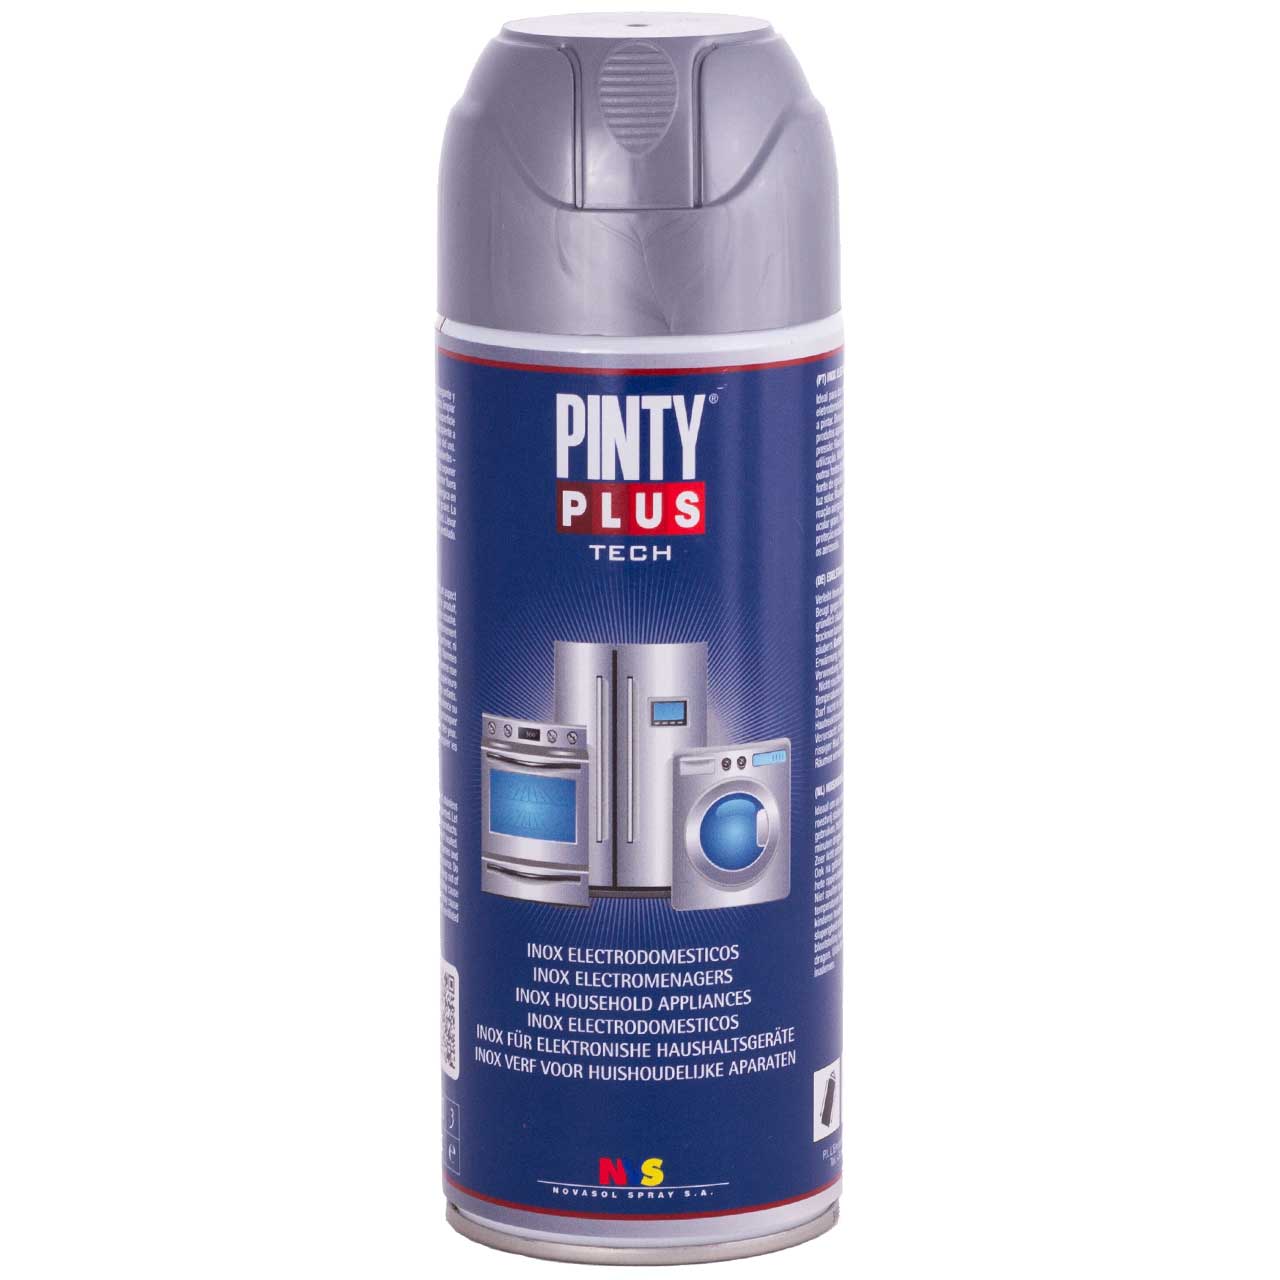 Stainless Steel Finish Inox Spray Paint For House Appliances, Pintyplus